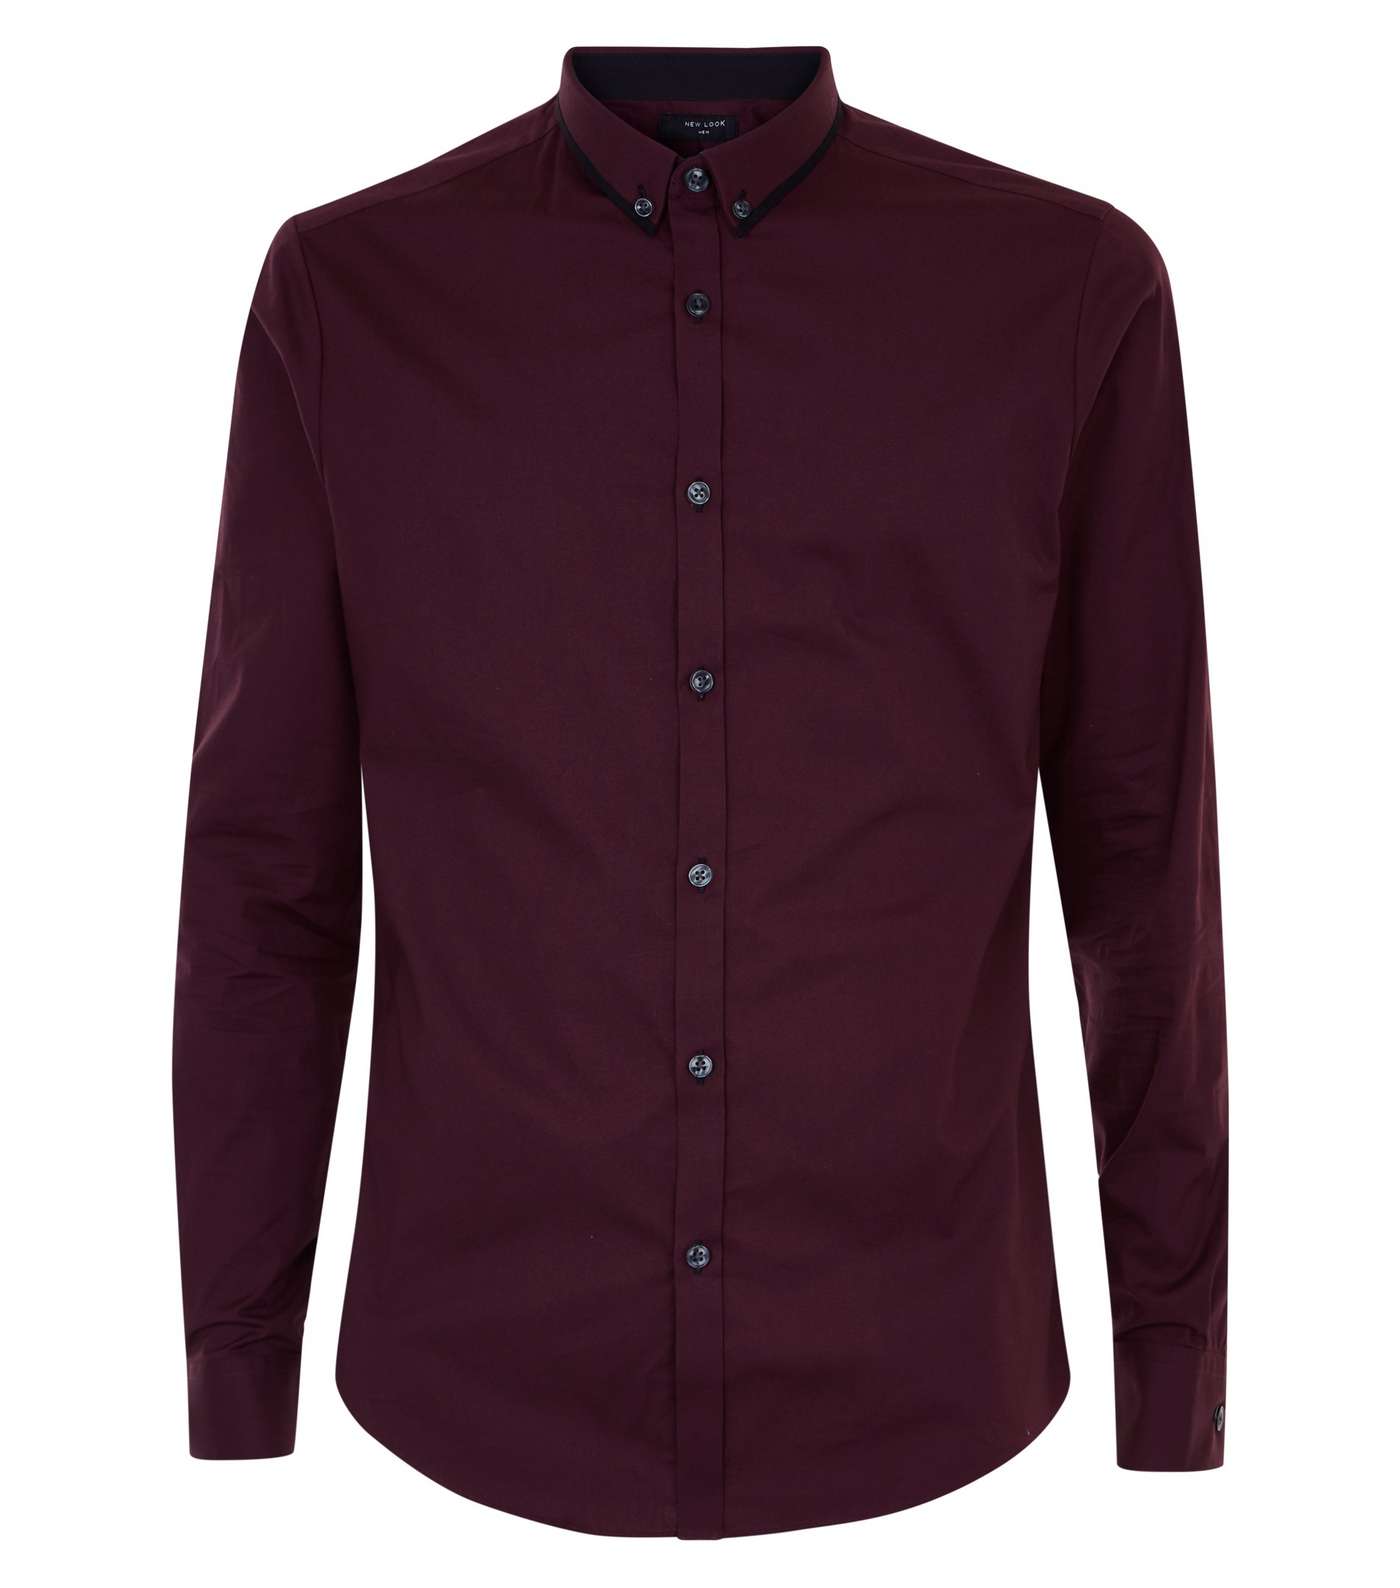 Burgundy Double Collar Trim Muscle Fit Shirt Image 4